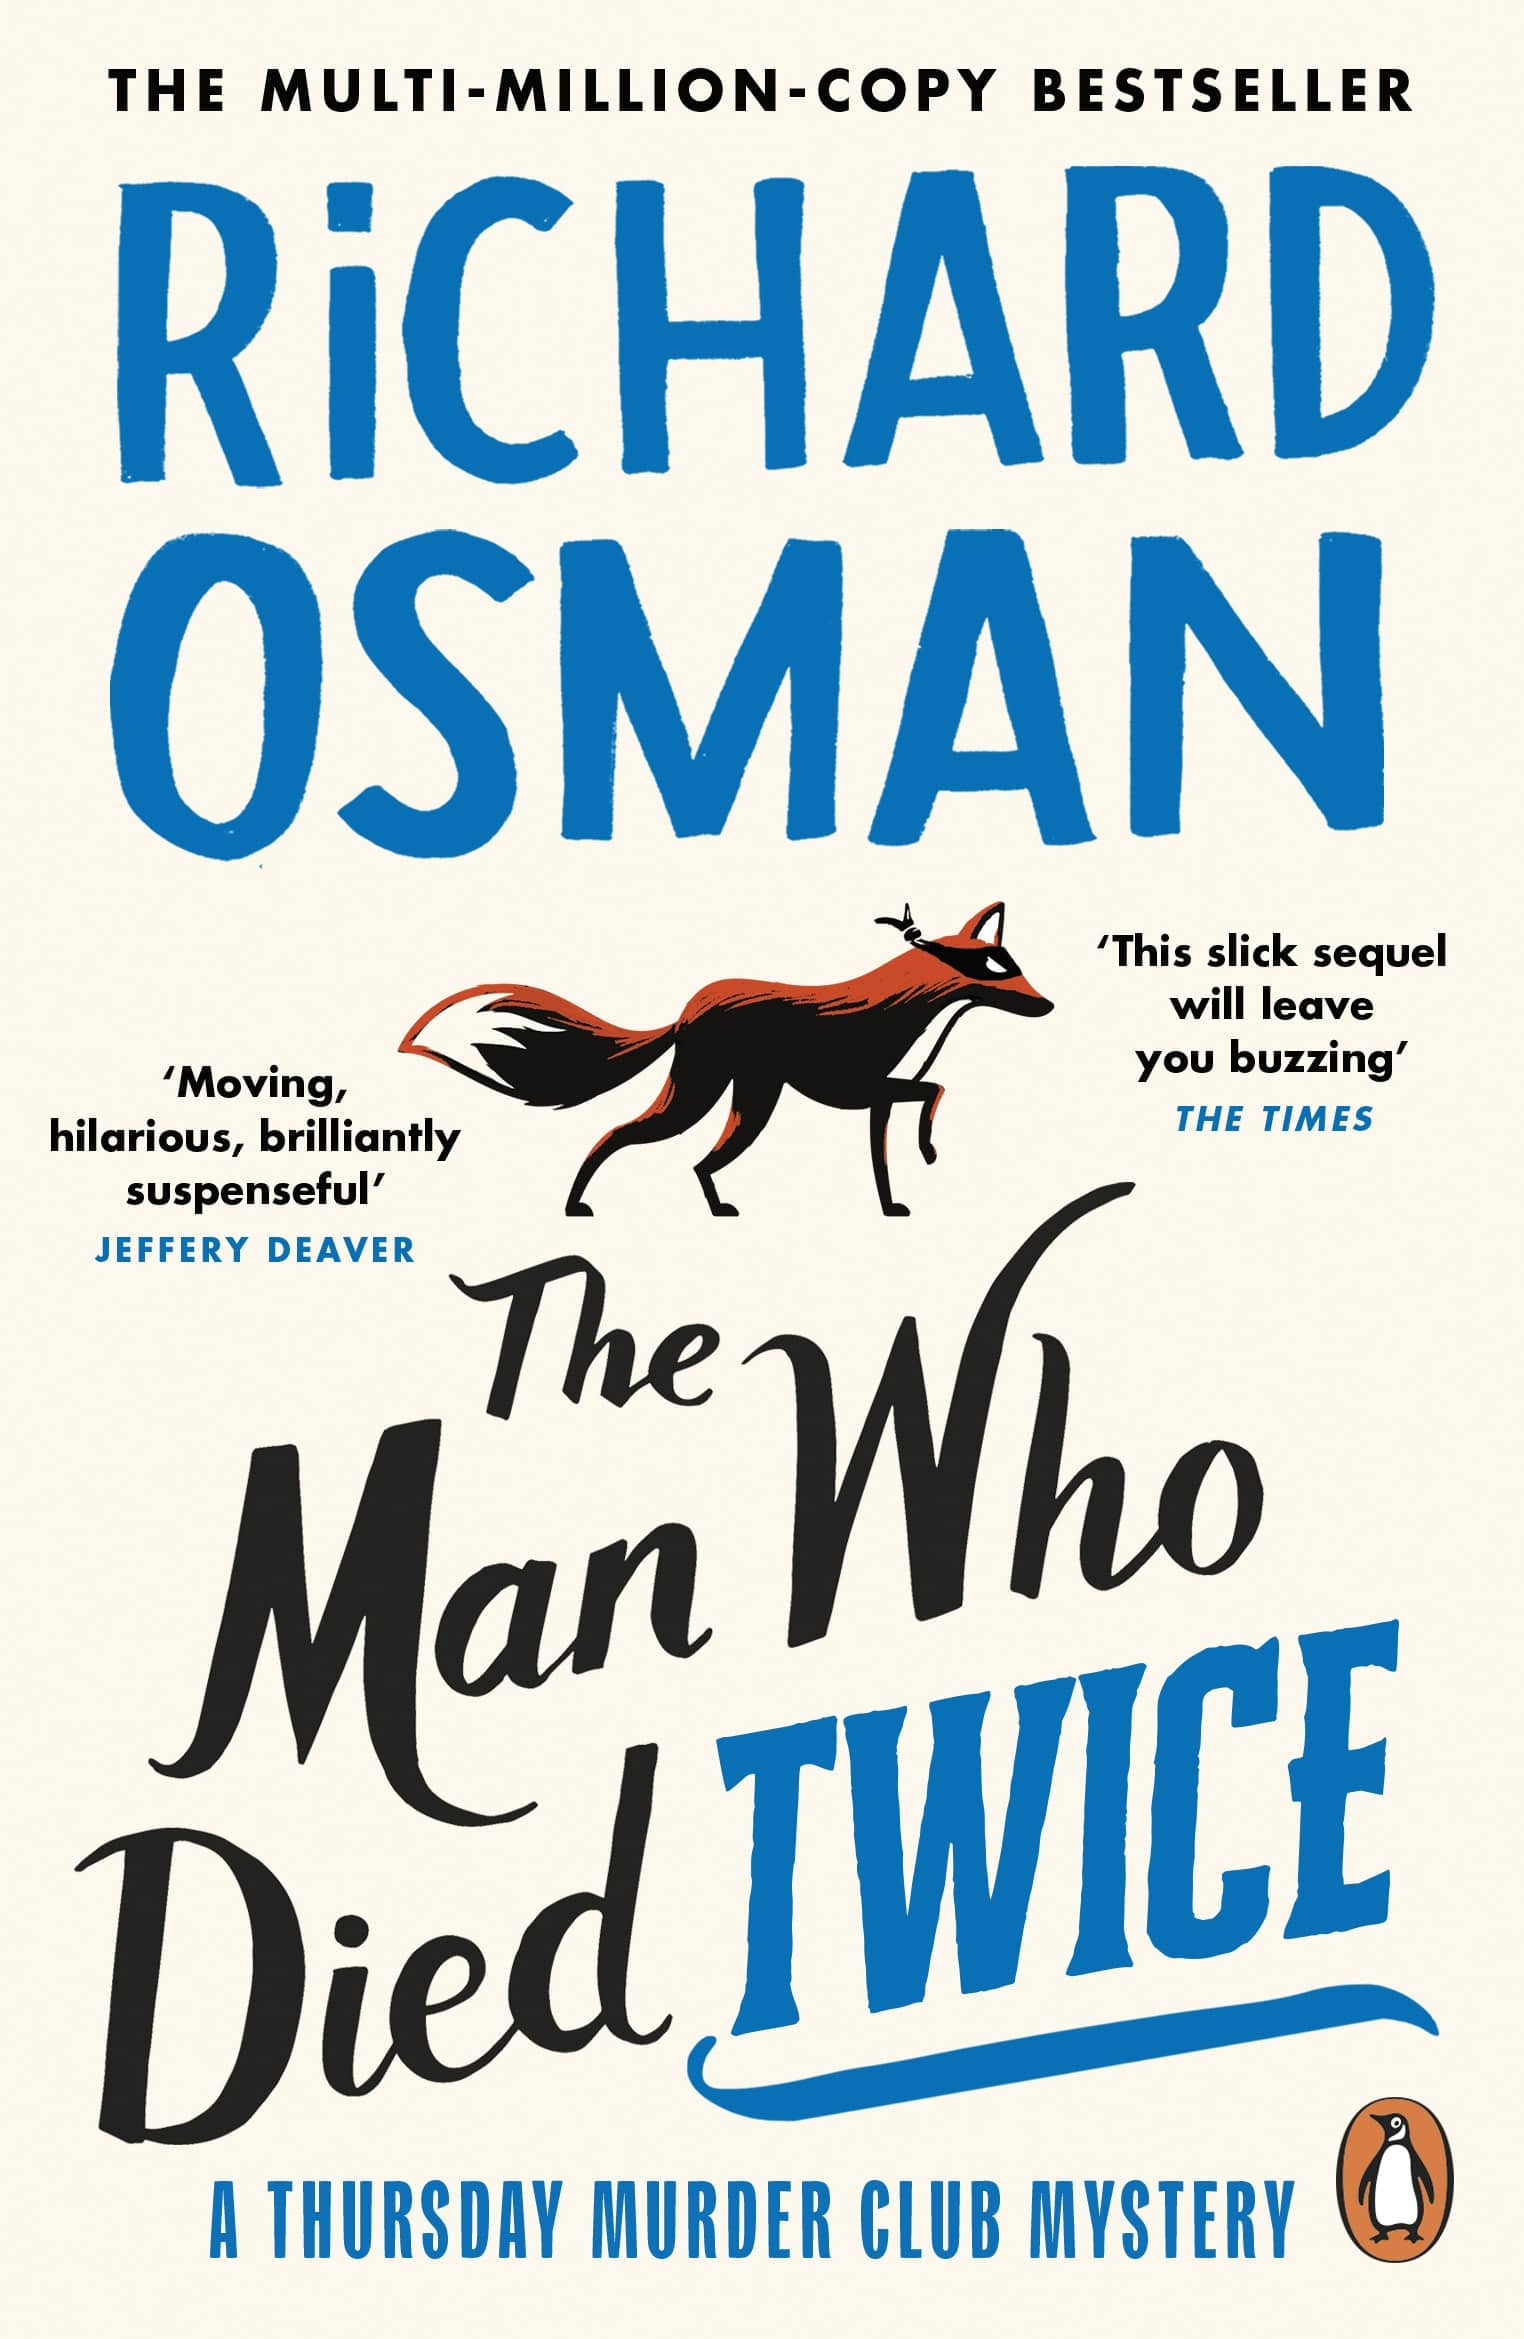 Book cover of The Man Who Died Twice by Richard Osman, book 2 in the Thursday Murder Club series